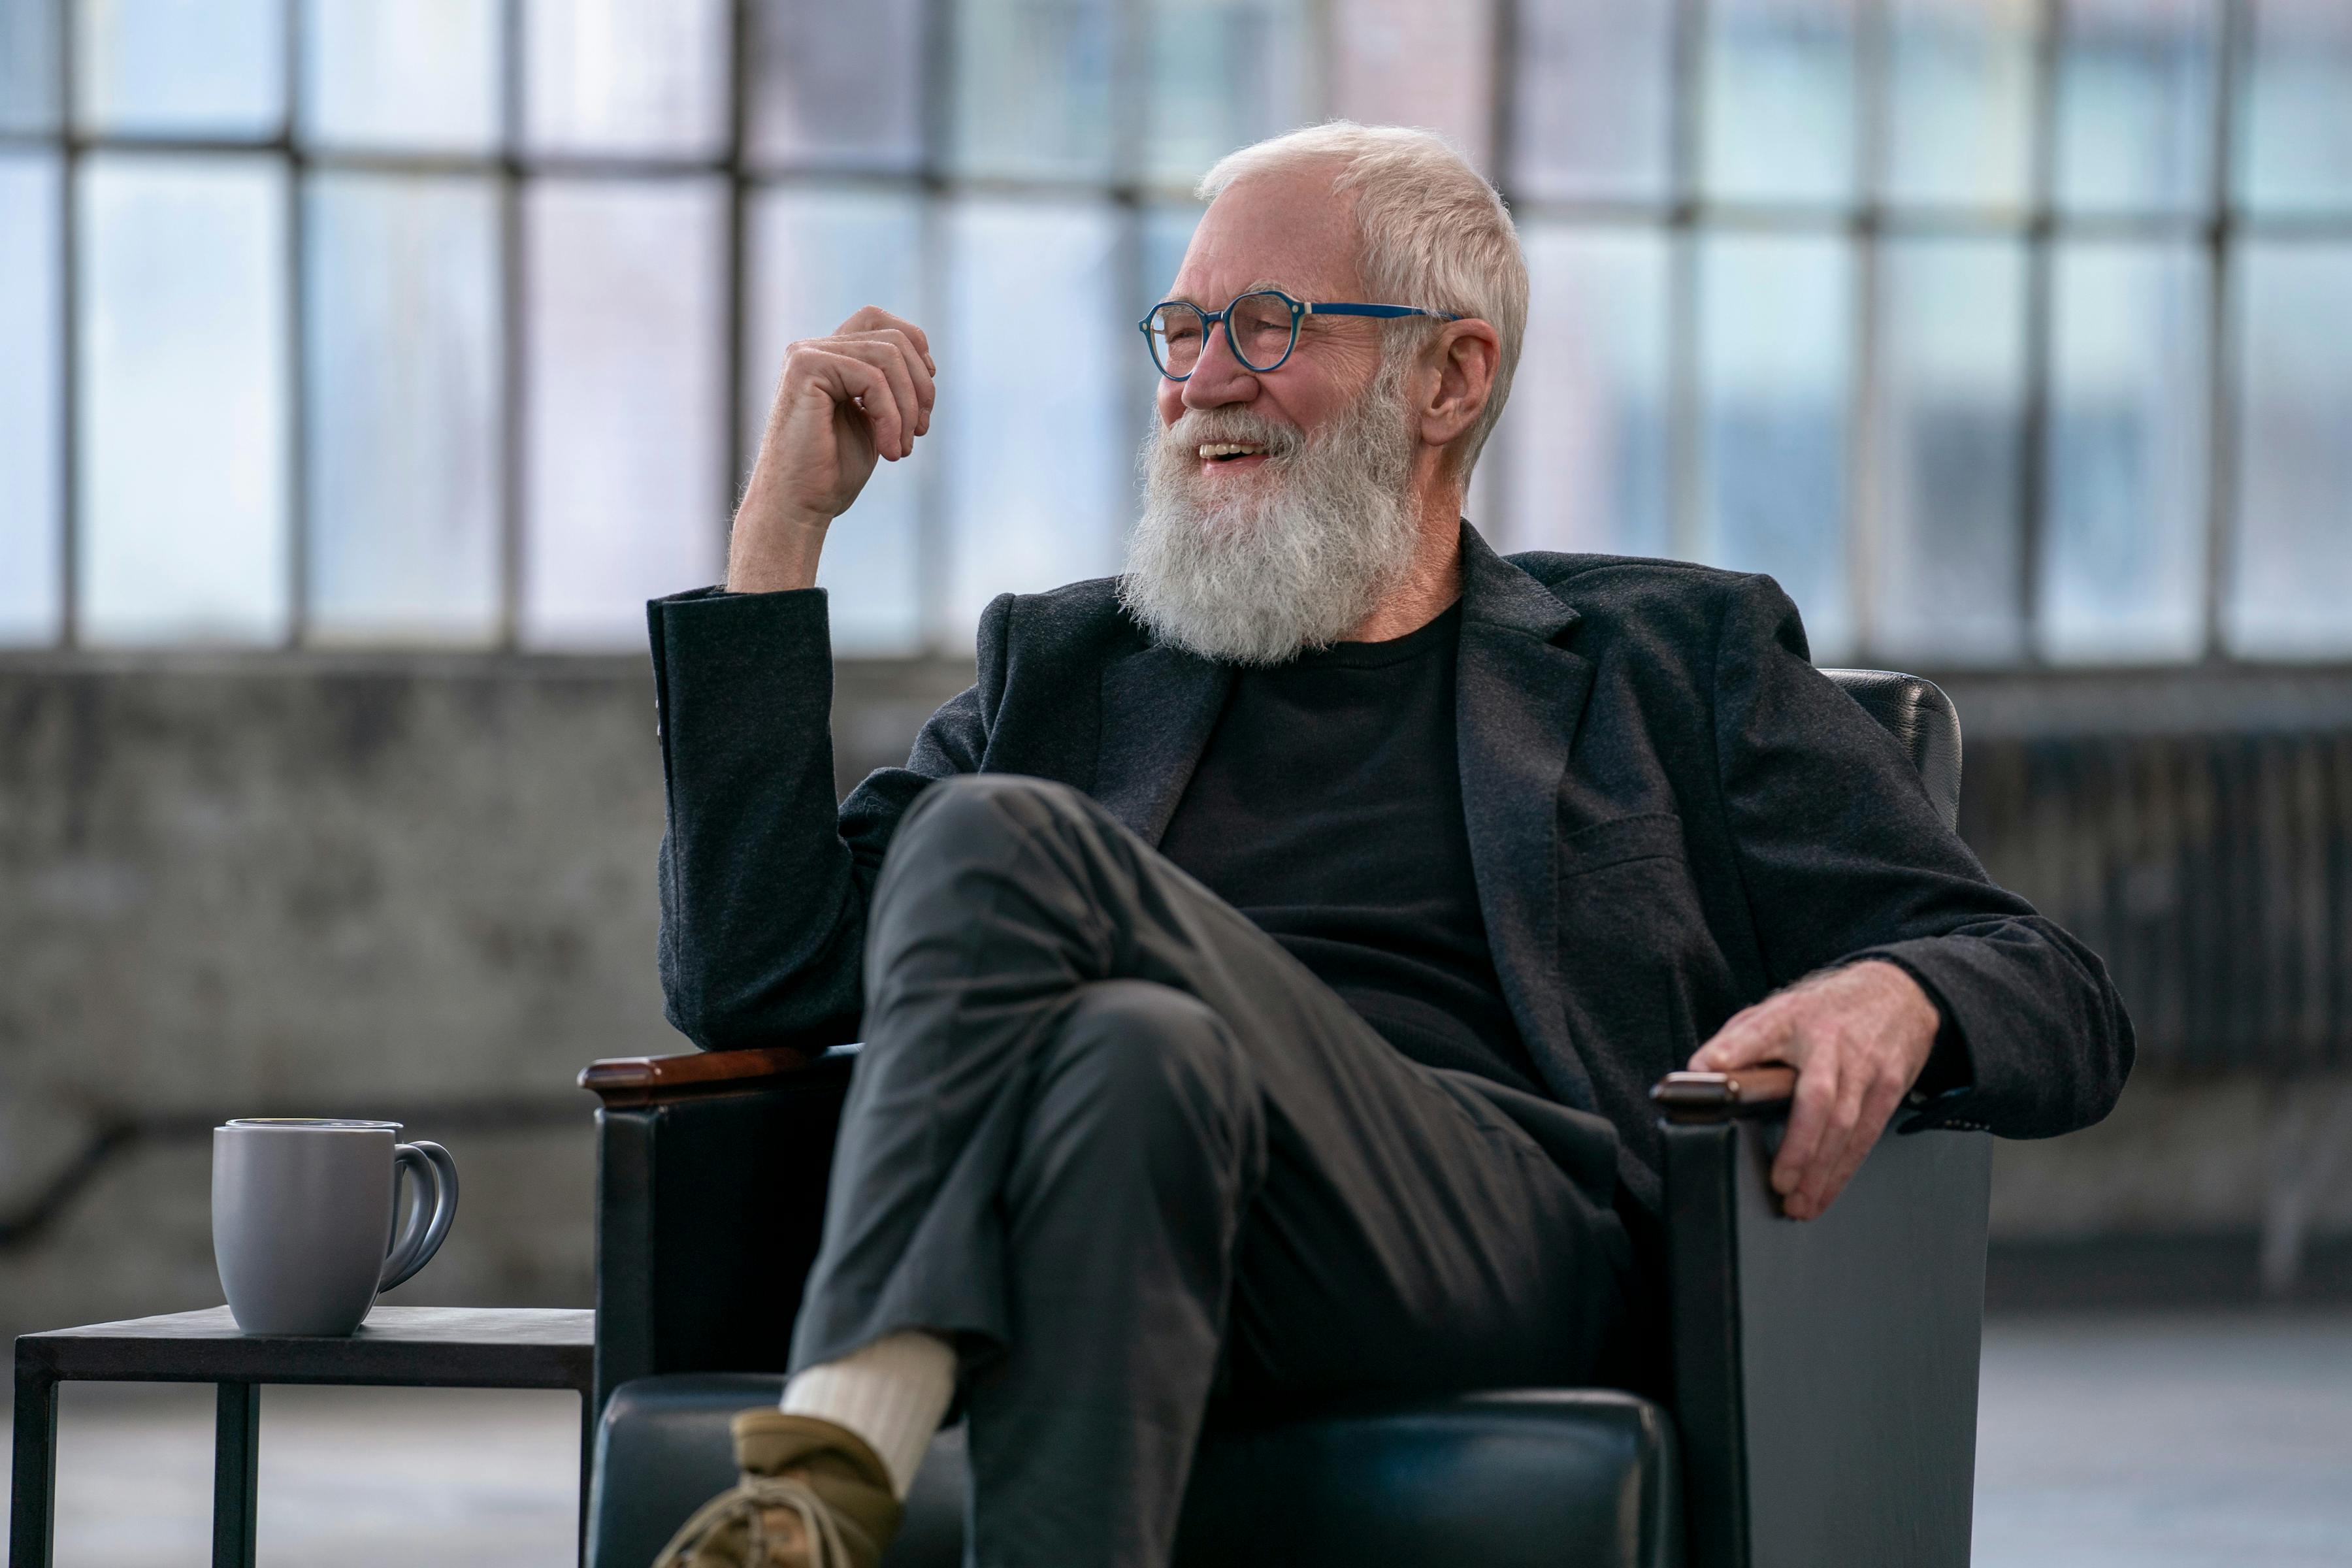 David Letterman wears all black and sits in a black leather chair. His bear is robust, and he seems to be laughing.